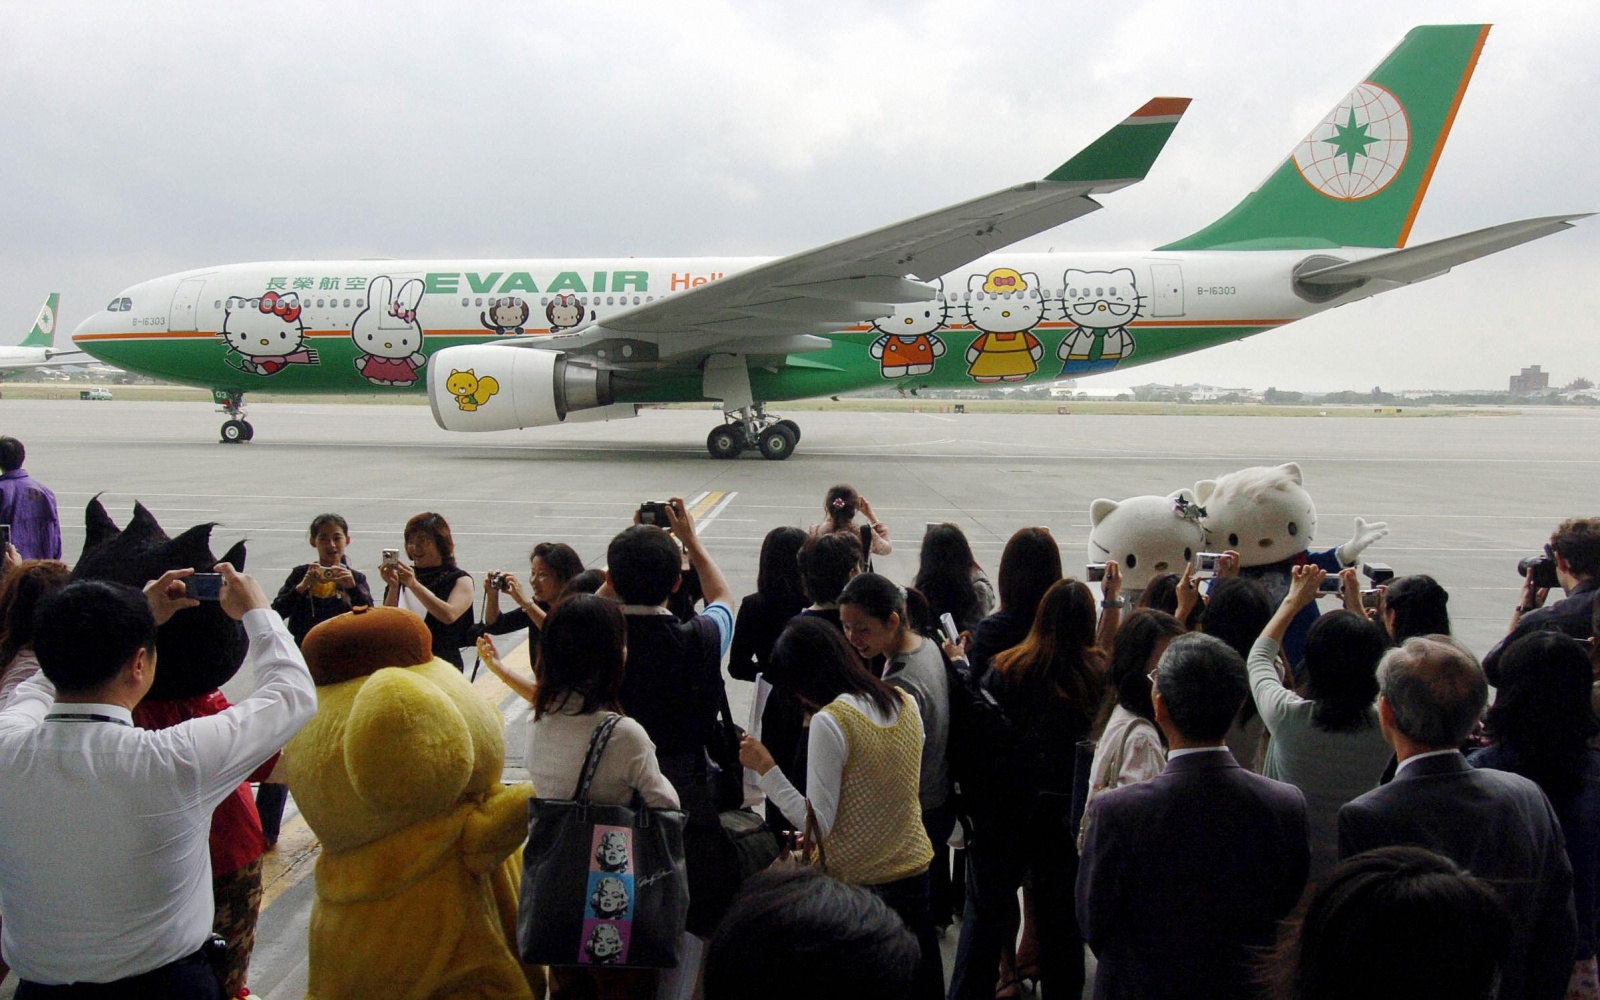 4 Things That Happened When the Hello Kitty Airplane Landed in Houston